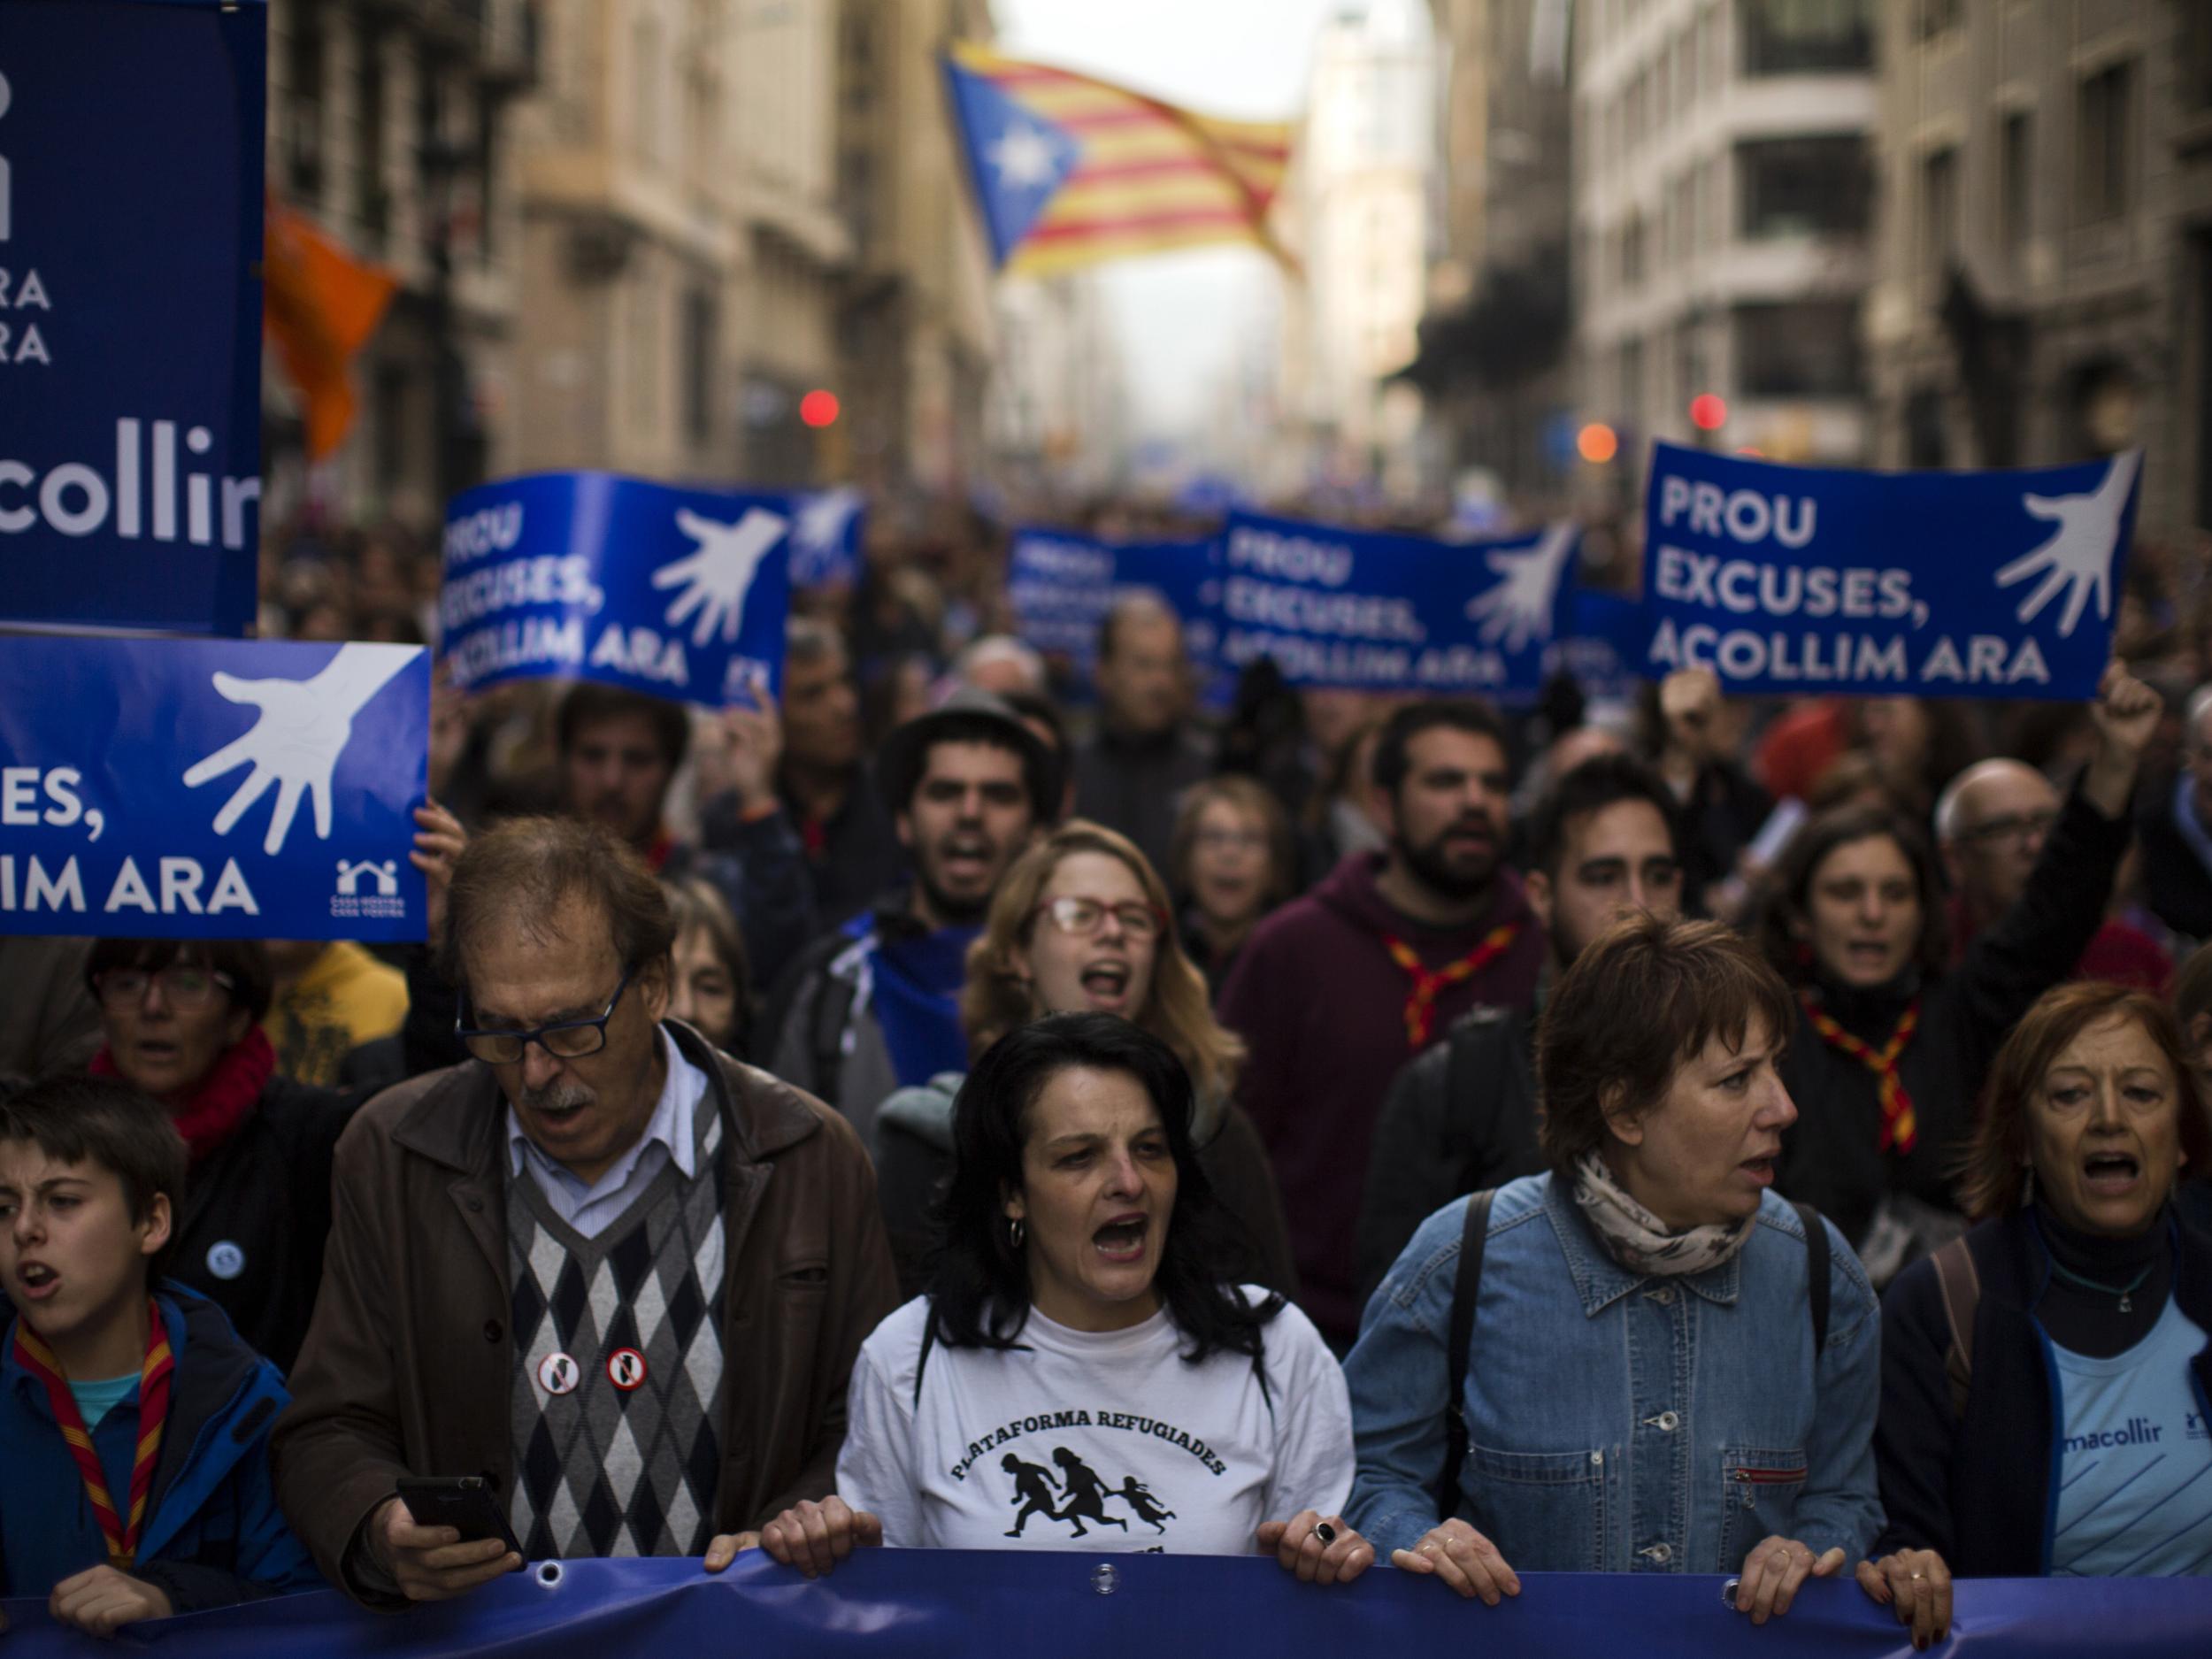 Demonstrators march as they take part in a protest along the street in downtown Barcelona, Spain